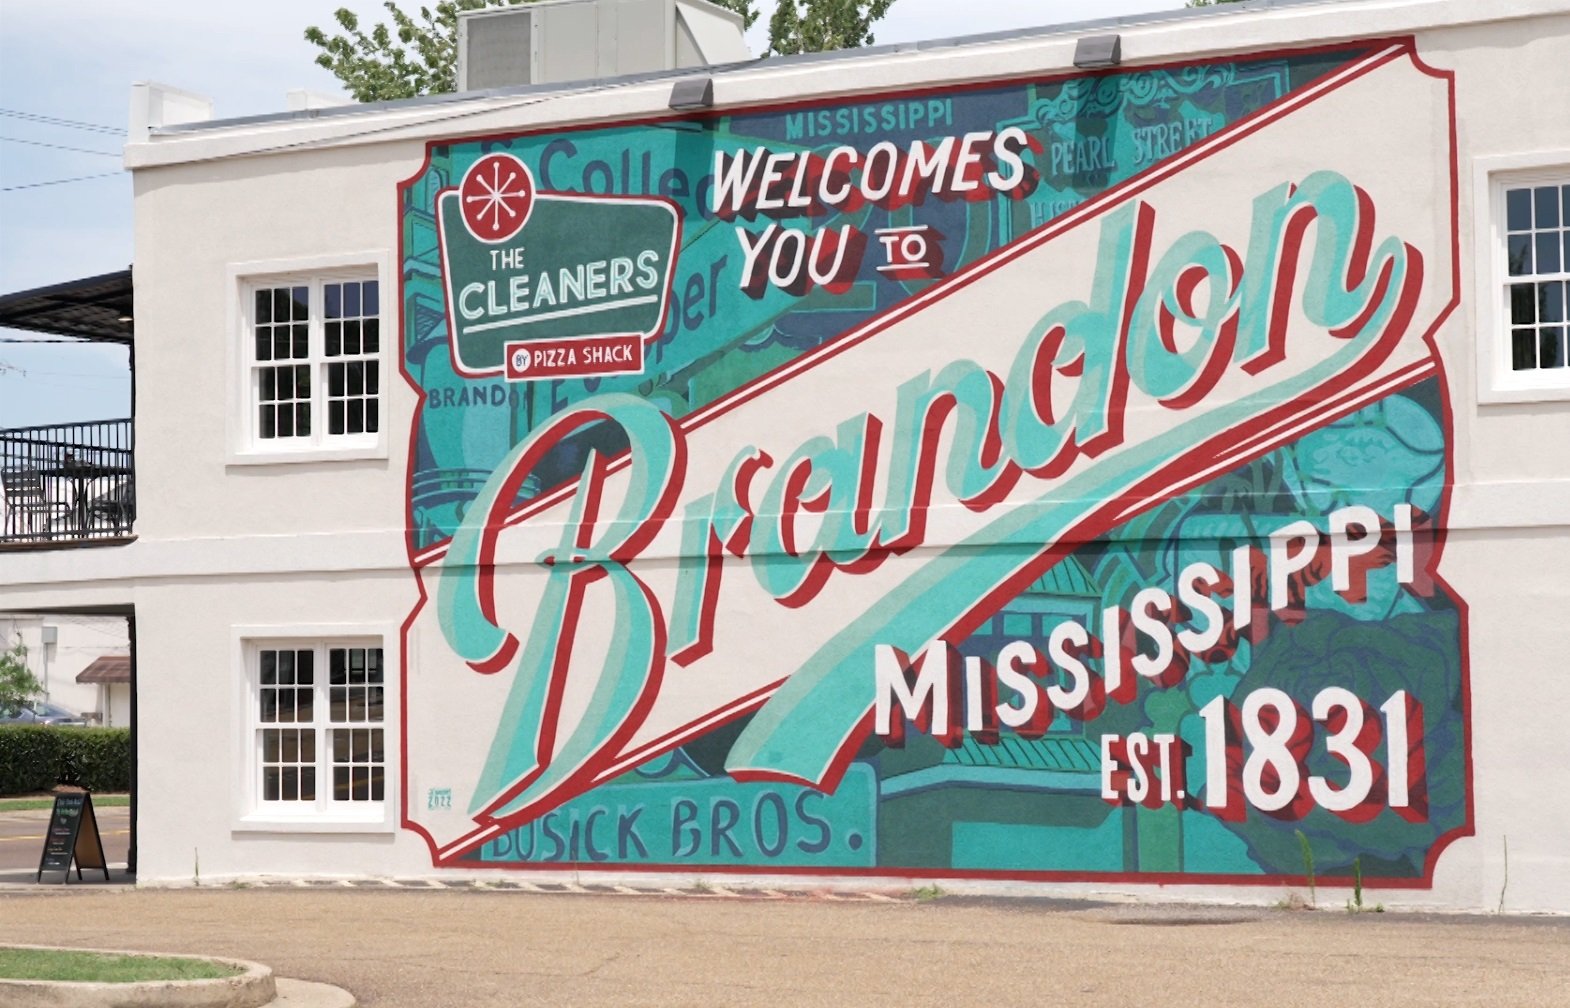 Things to do in Brandon, Mississippi